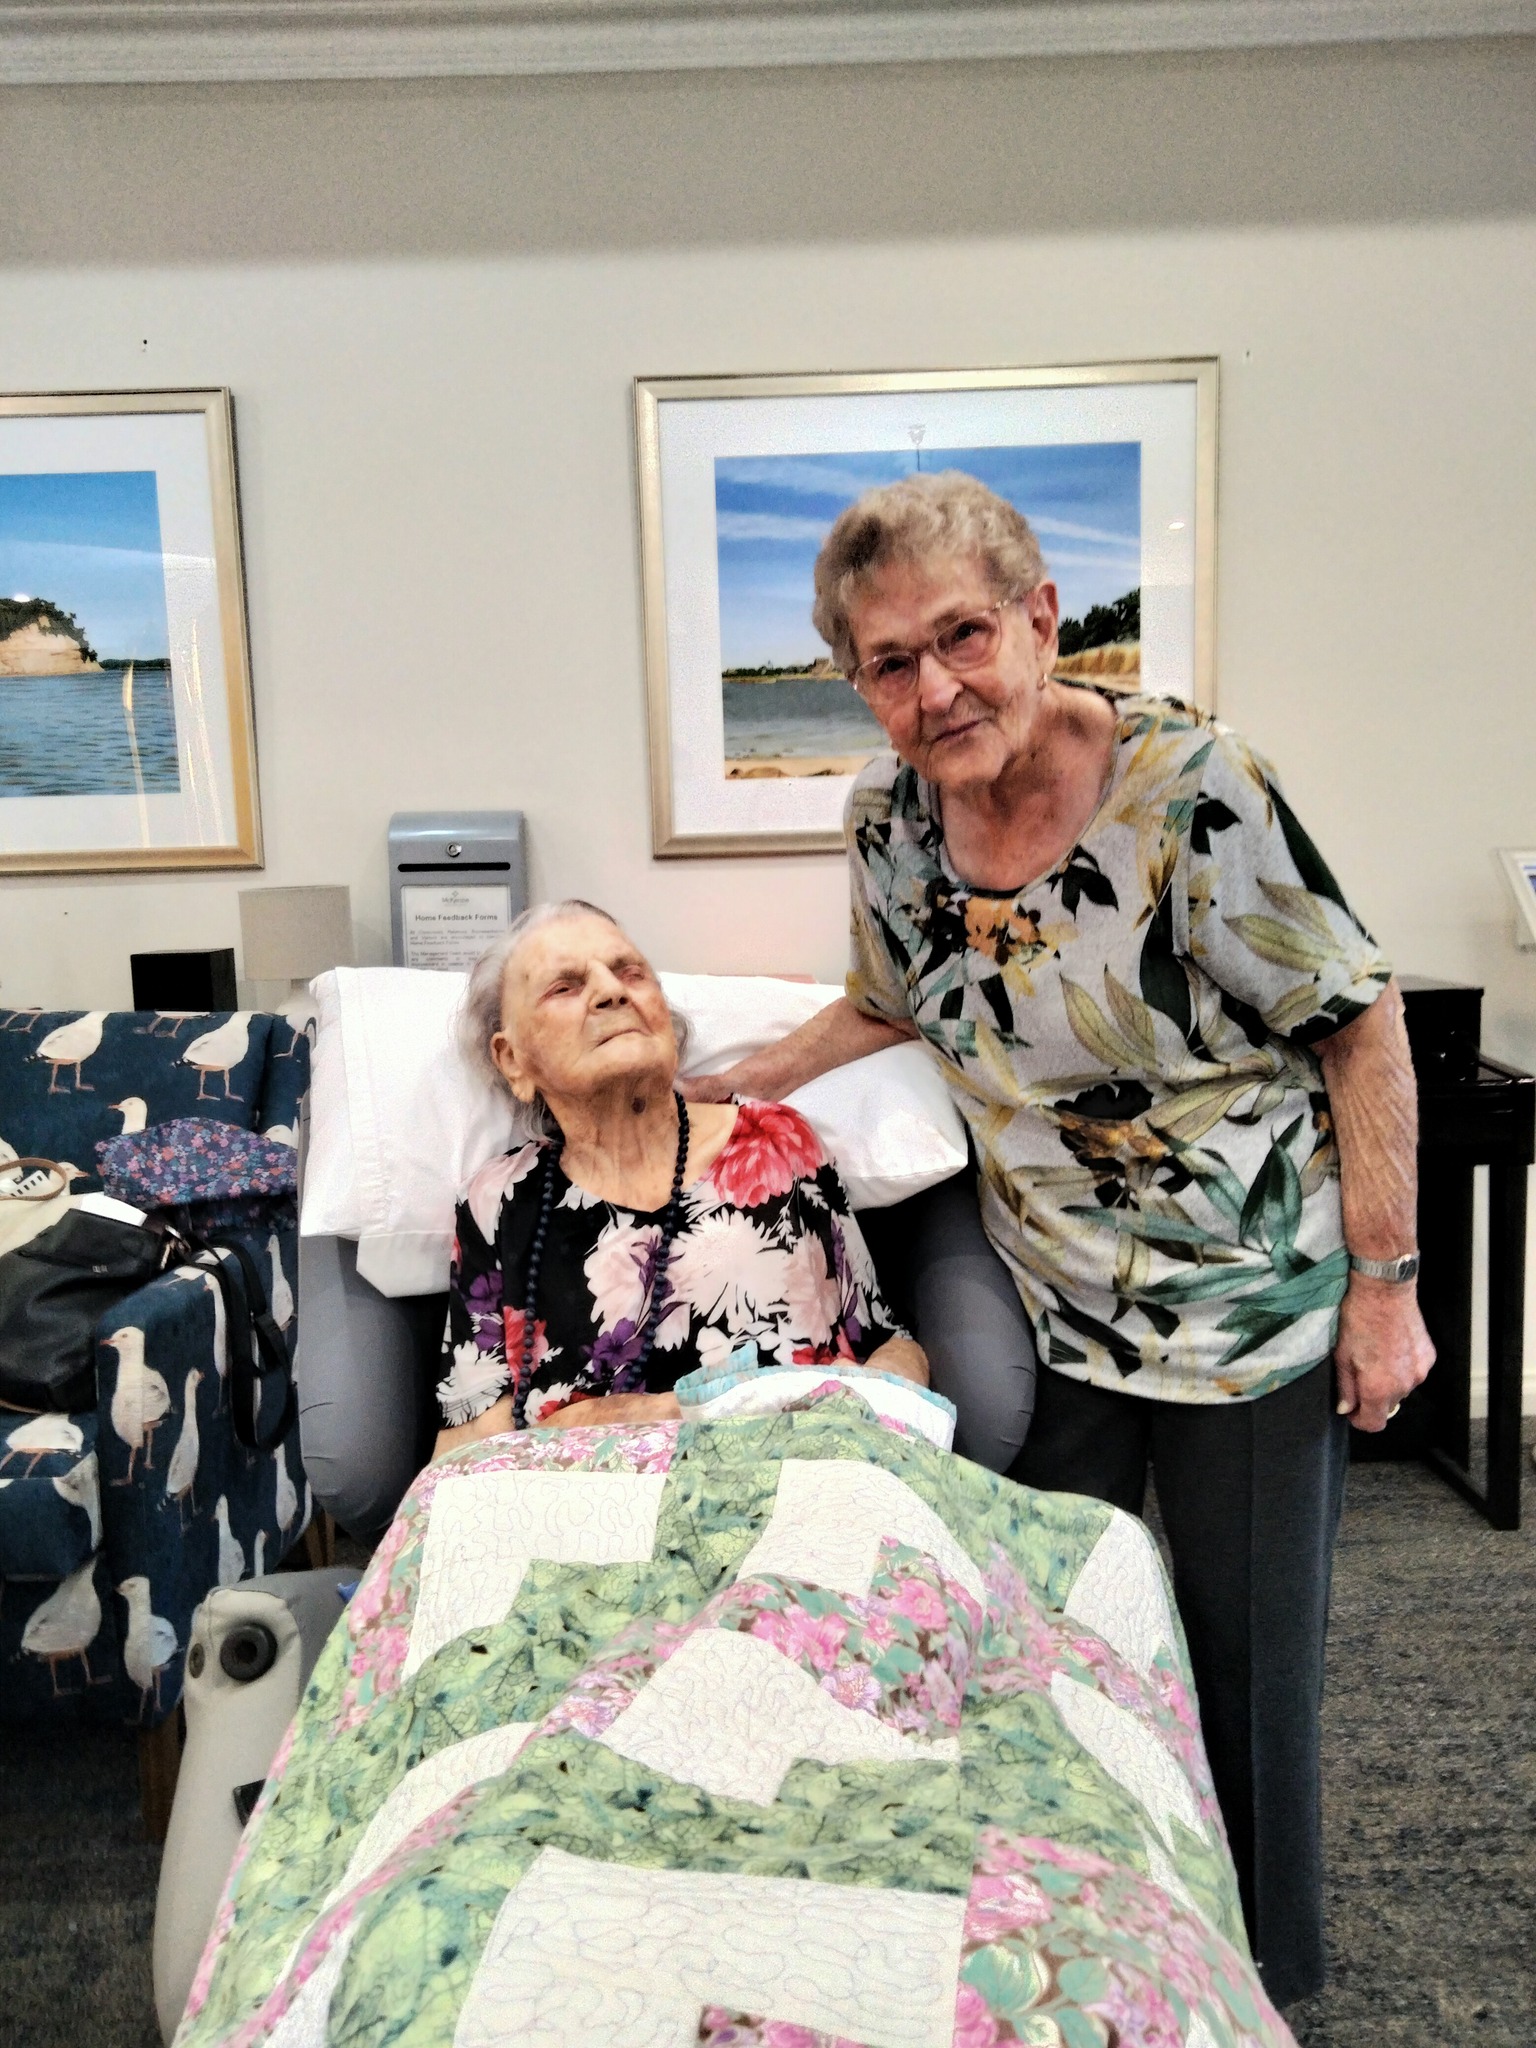 On her 111th birthday in 2022. (Source: Facebook/Bribie Cove - McKenzie Aged Care Group)